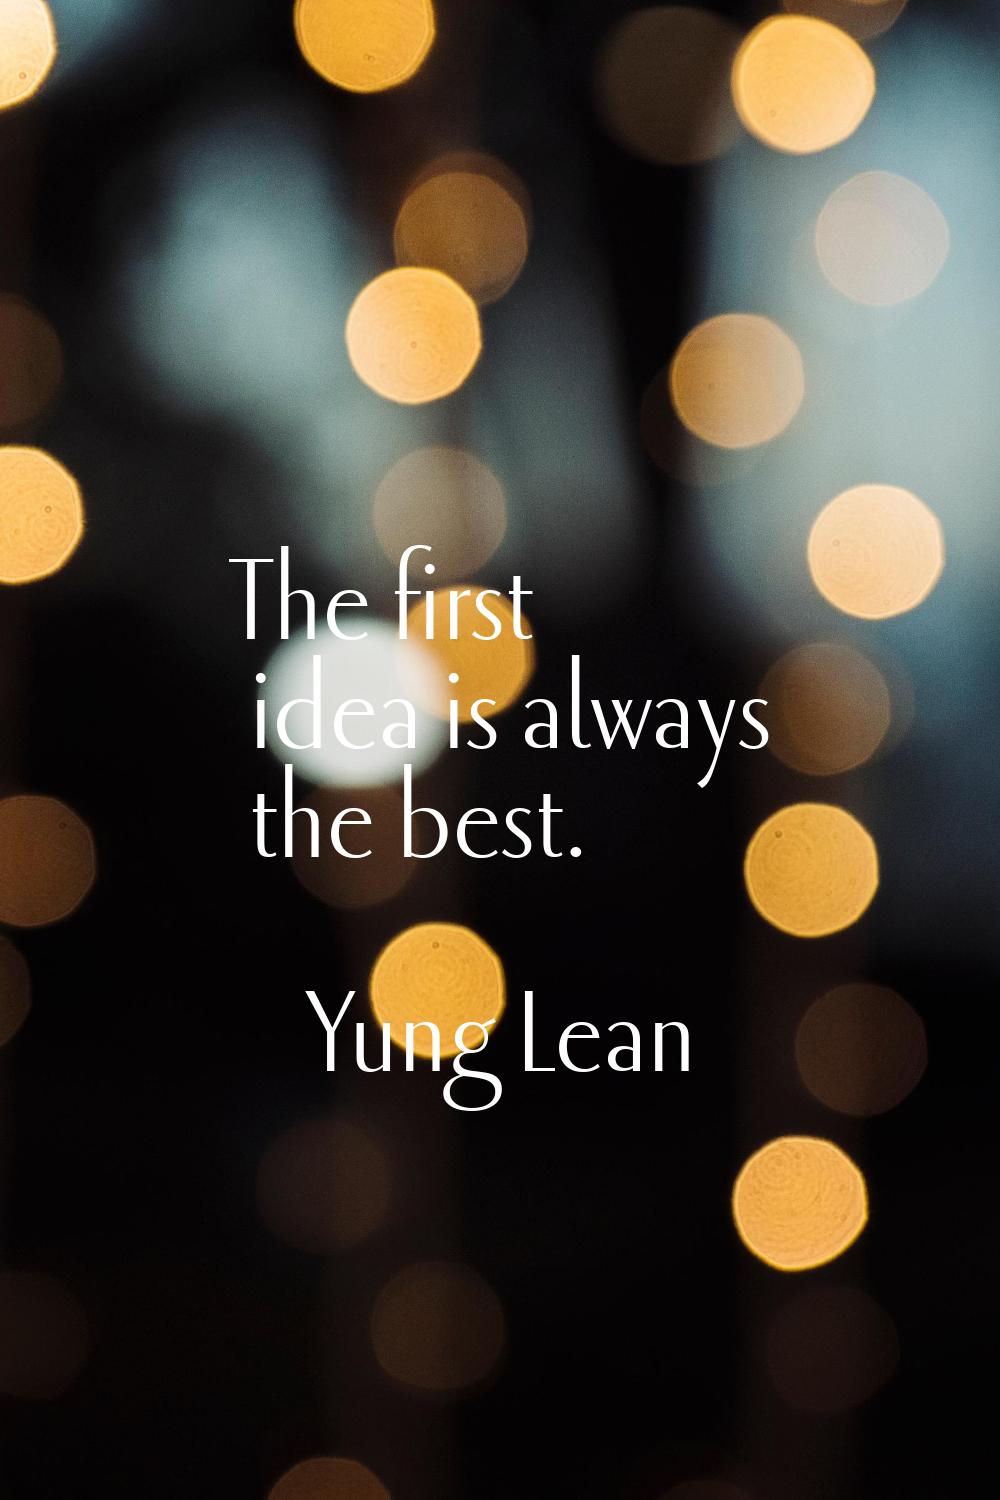 The first idea is always the best.